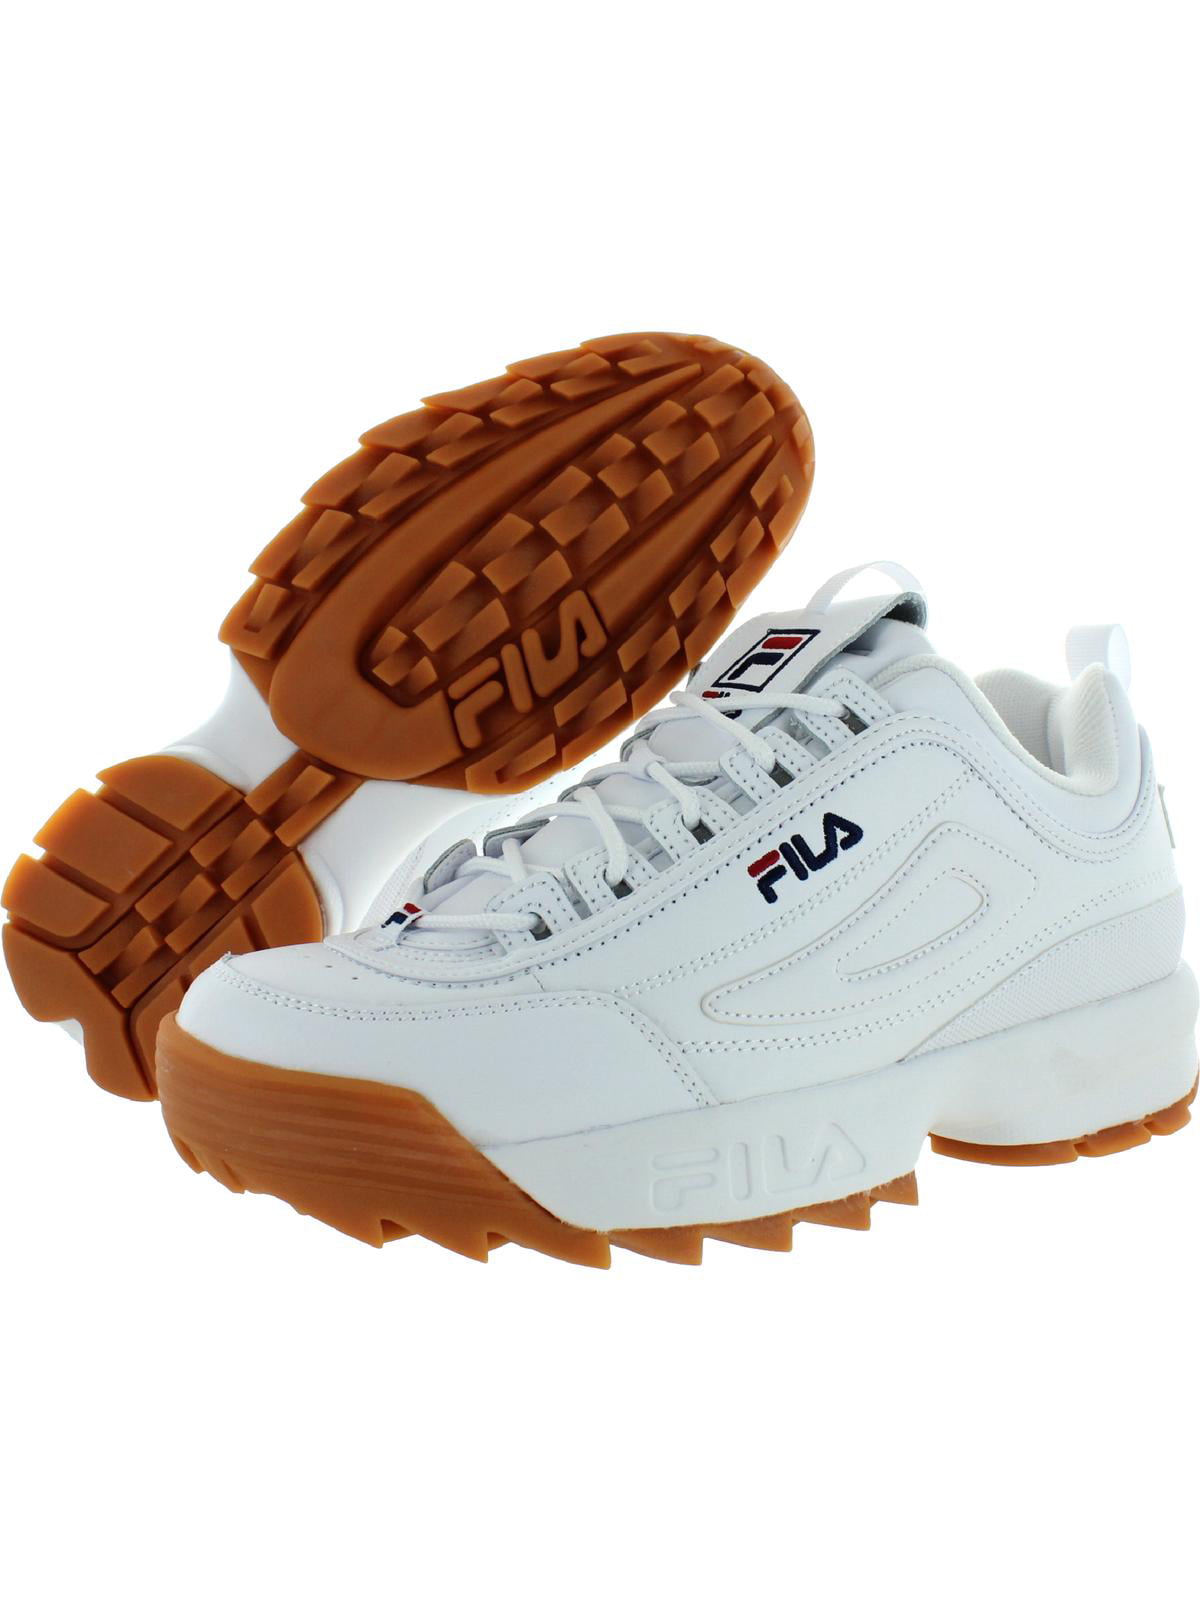 FILA Rubber Shoes (2 pairs) - sporting goods - by owner - sale - craigslist